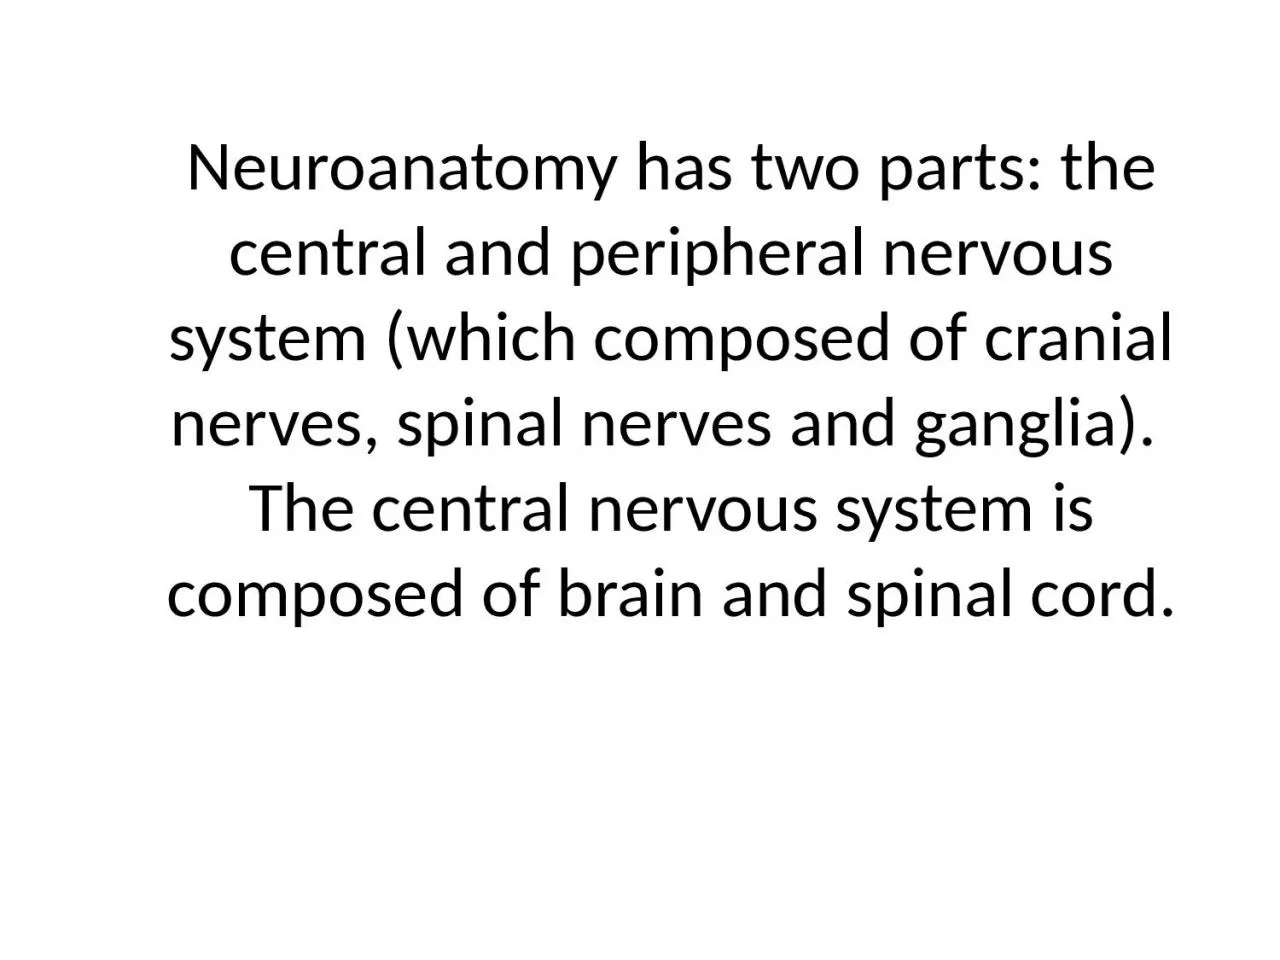 Neuroanatomy has two parts: the central and peripheral nervous system (which composed